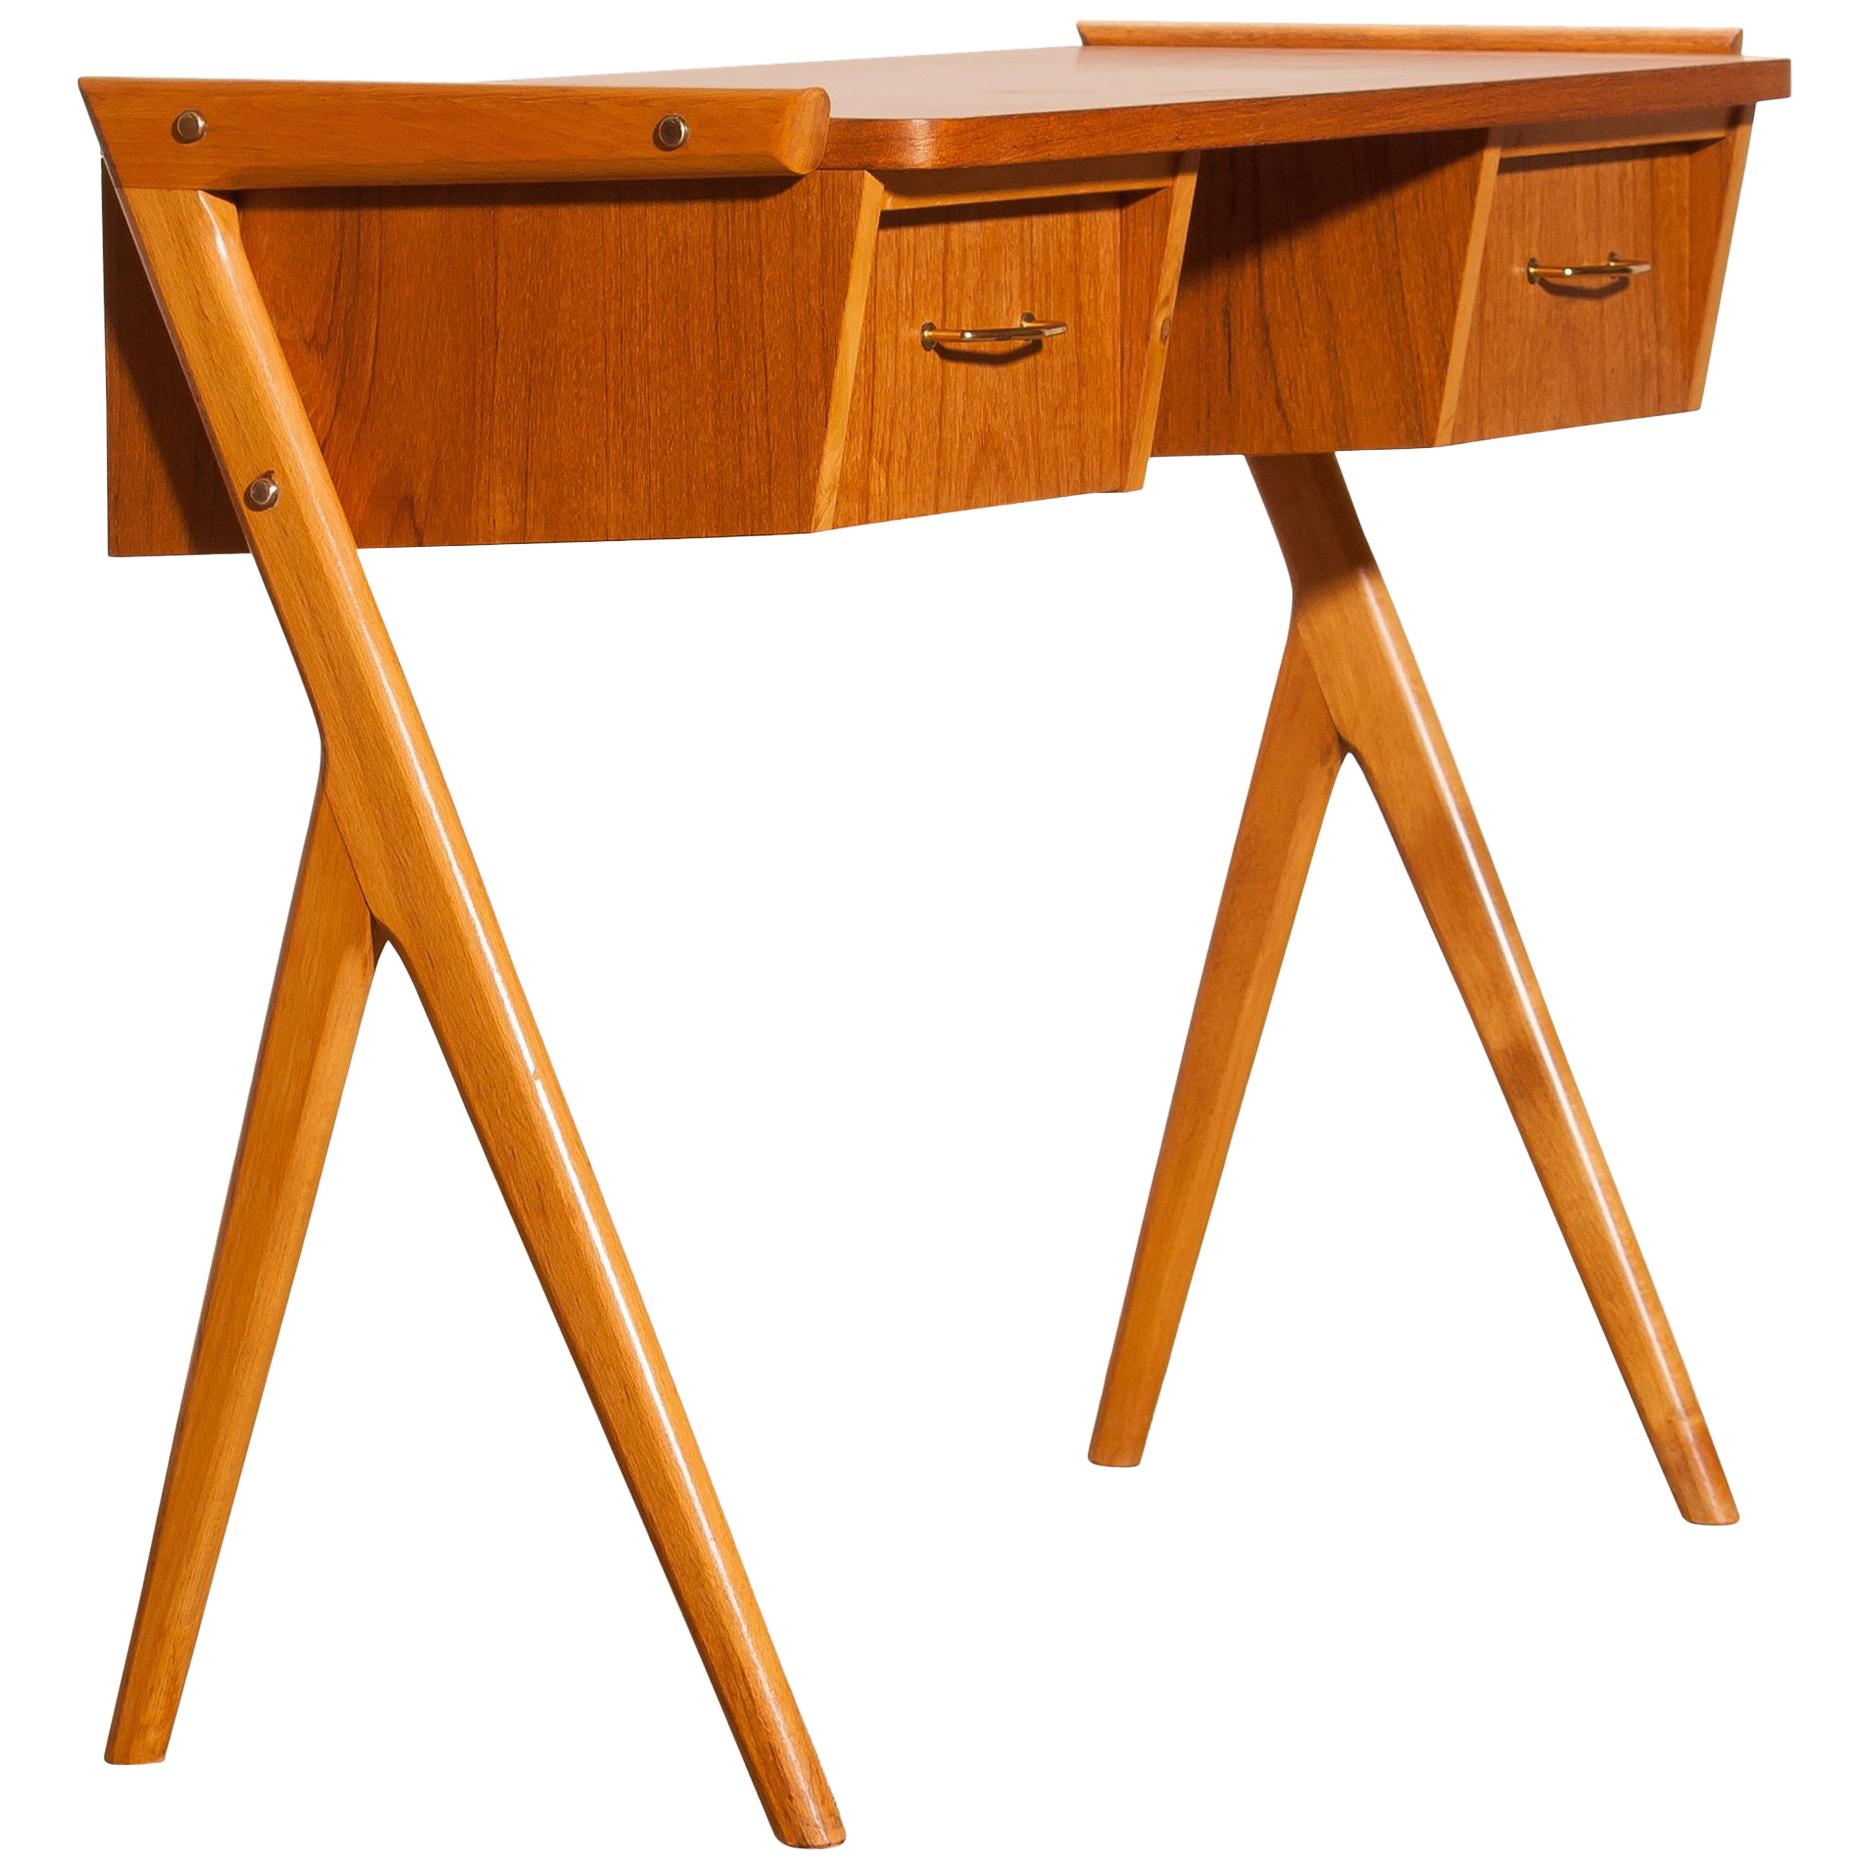 Very beautiful Vanity / ladies desk from Sweden
The table is made of teak and has two drawers with brass details.
It is in a very nice condition.
Period, 1950s.
Dimensions: H 70 cm, W 84 cm, D 40 cm.